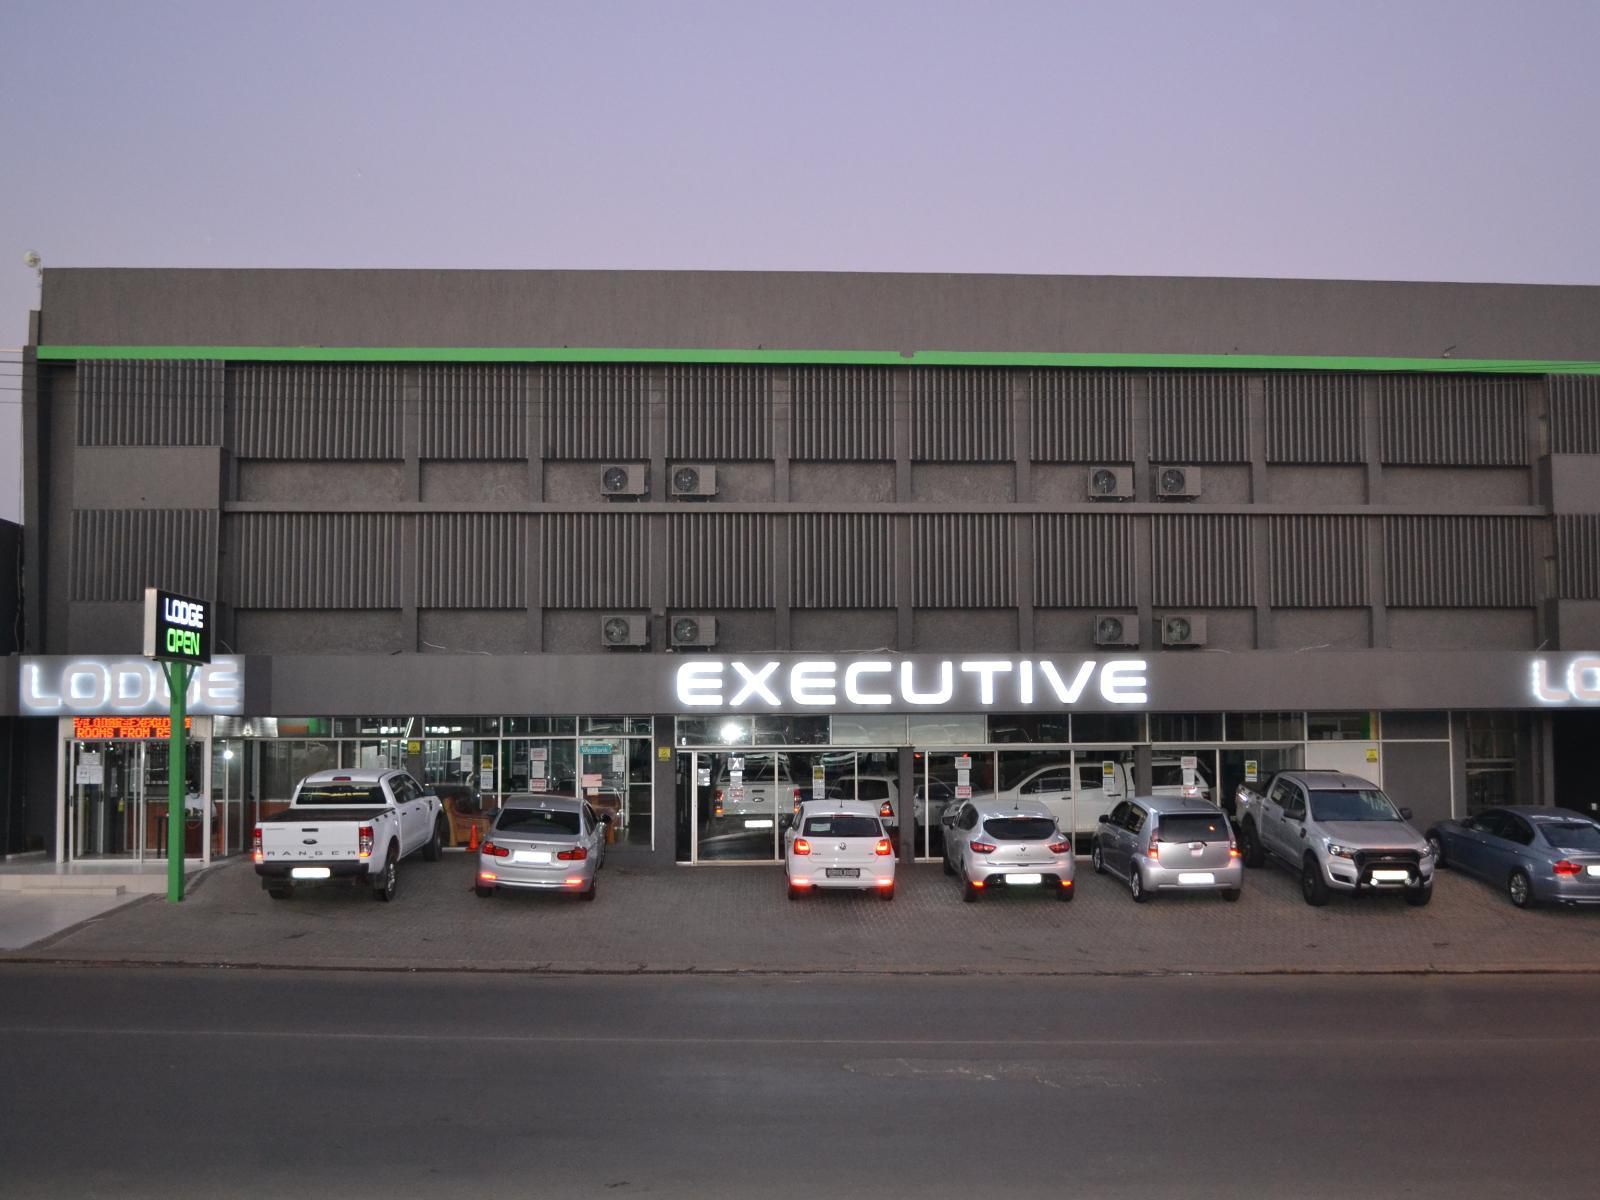 Executive Lodge Oranjesig Bloemfontein Free State South Africa Unsaturated, Car, Vehicle, Building, Architecture, Airport